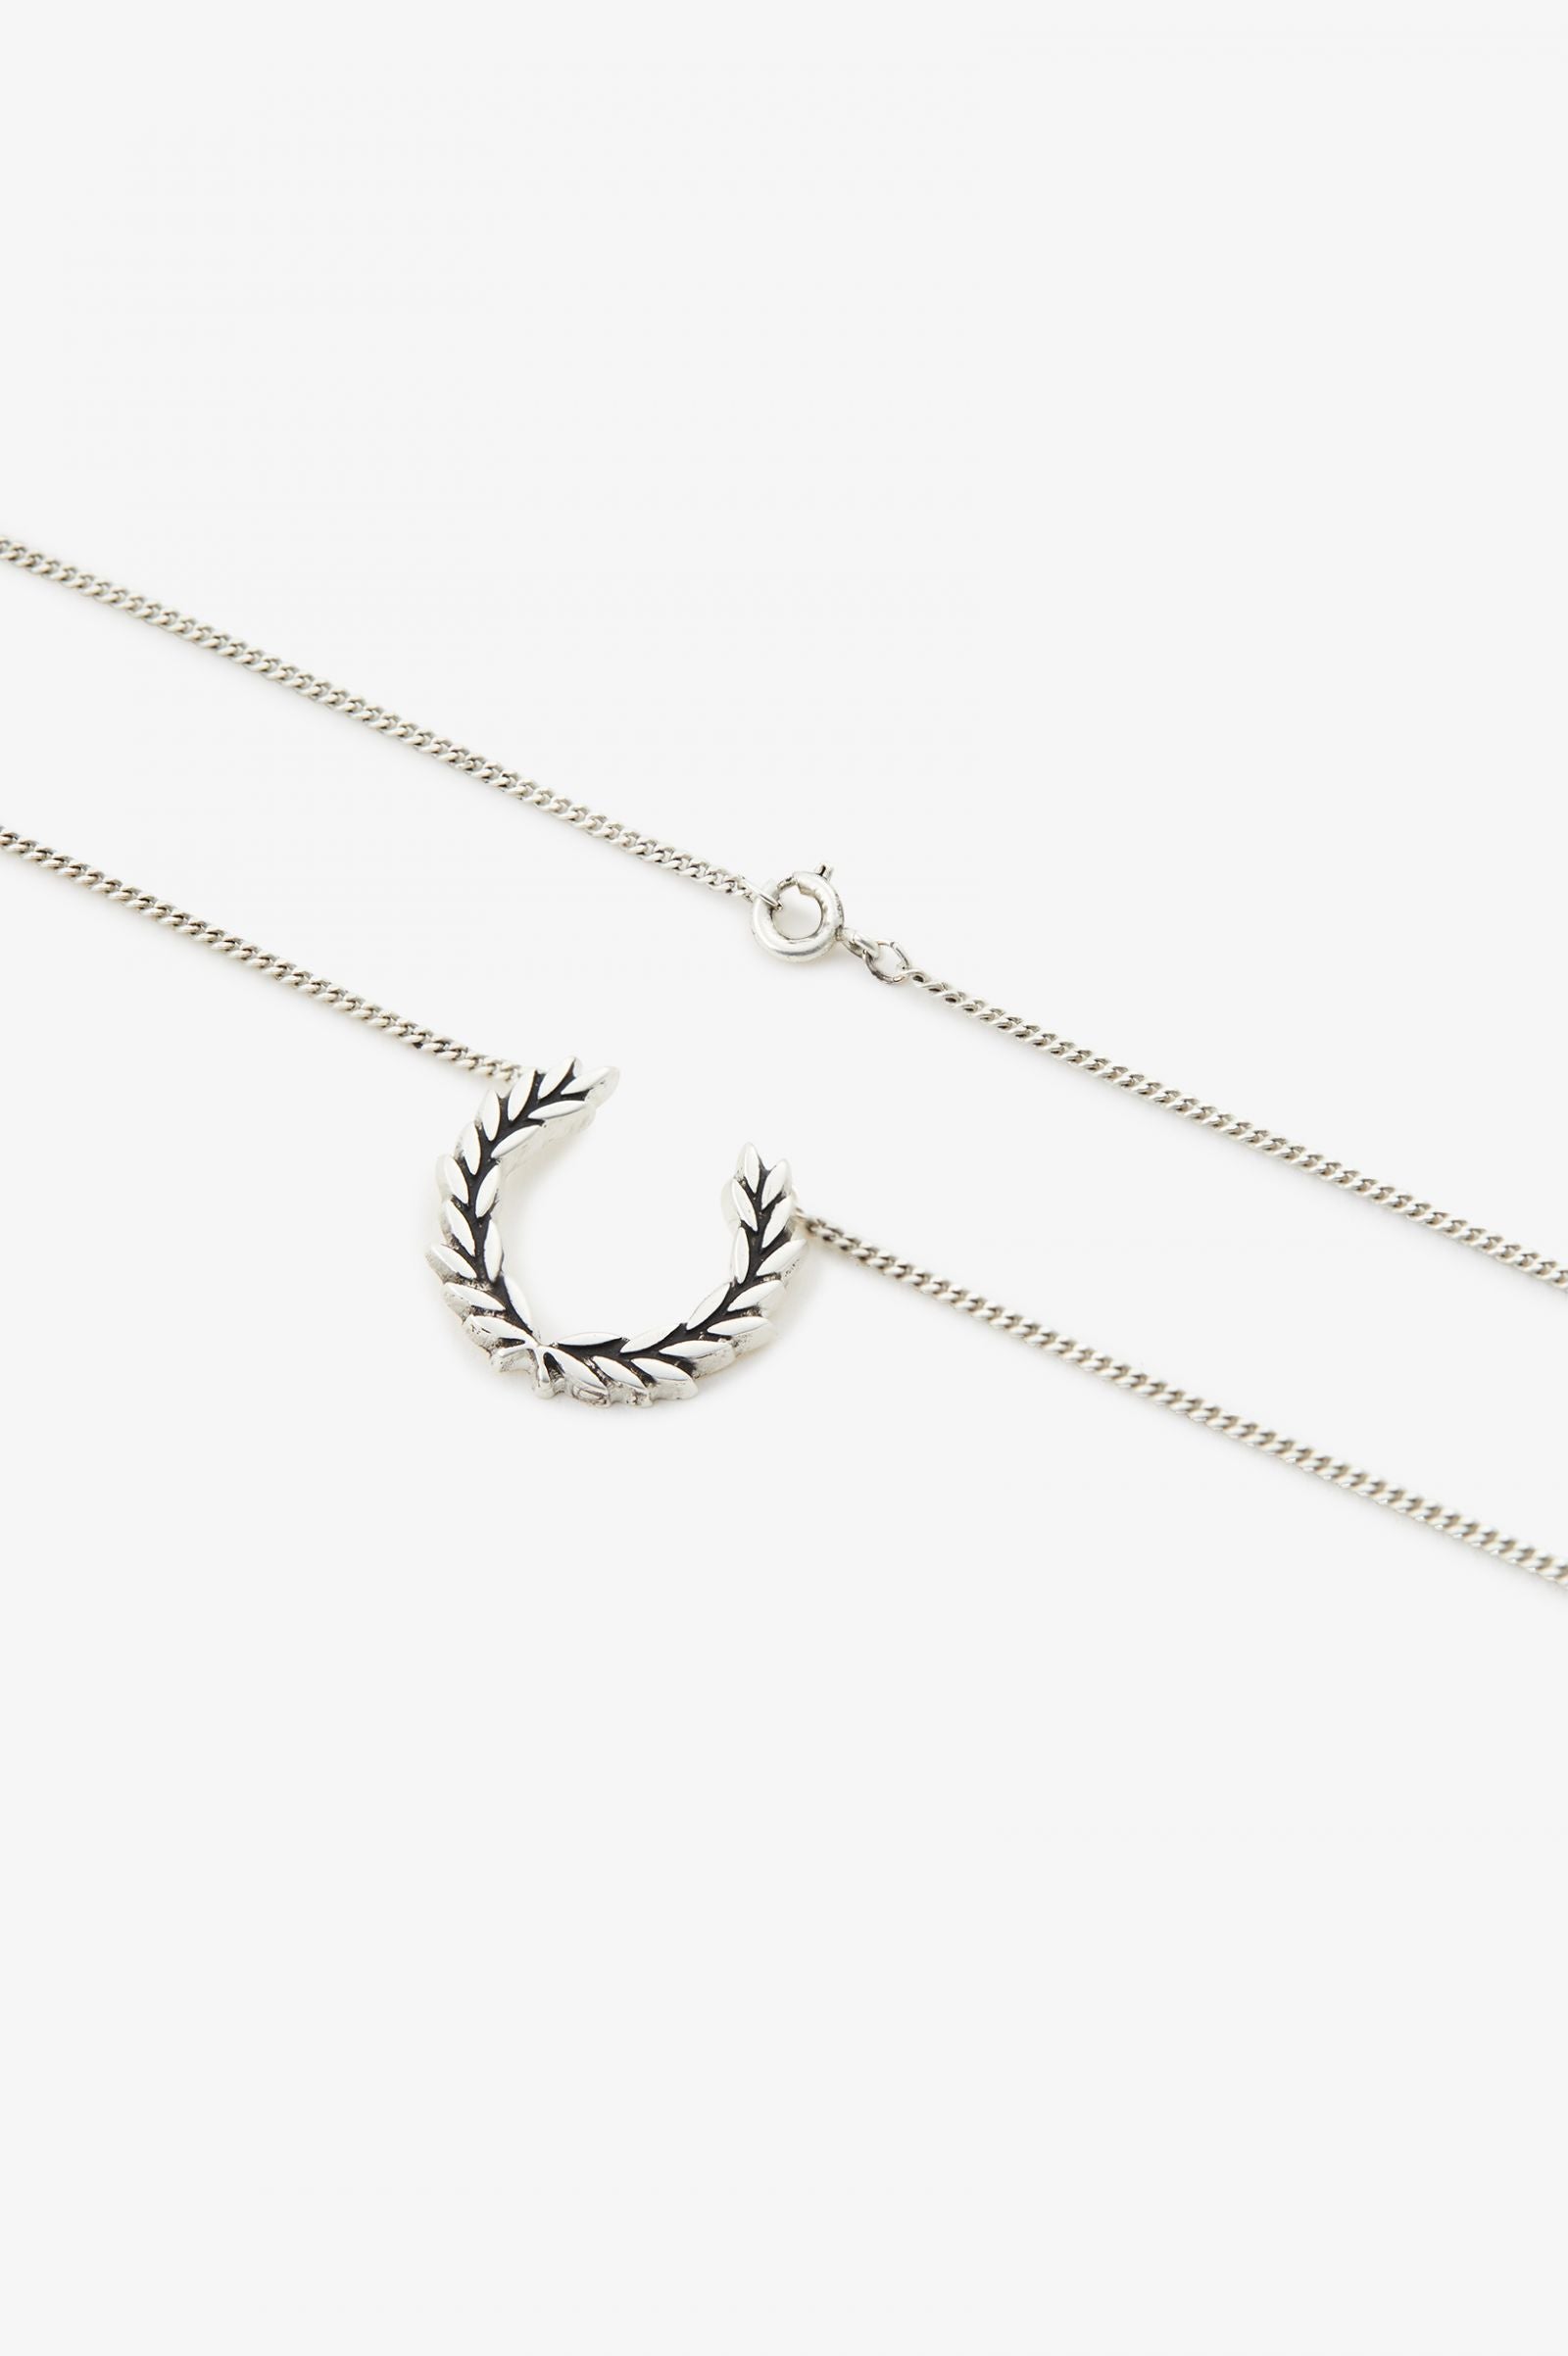 Laurel Wreath Necklace – Posers Hollywood